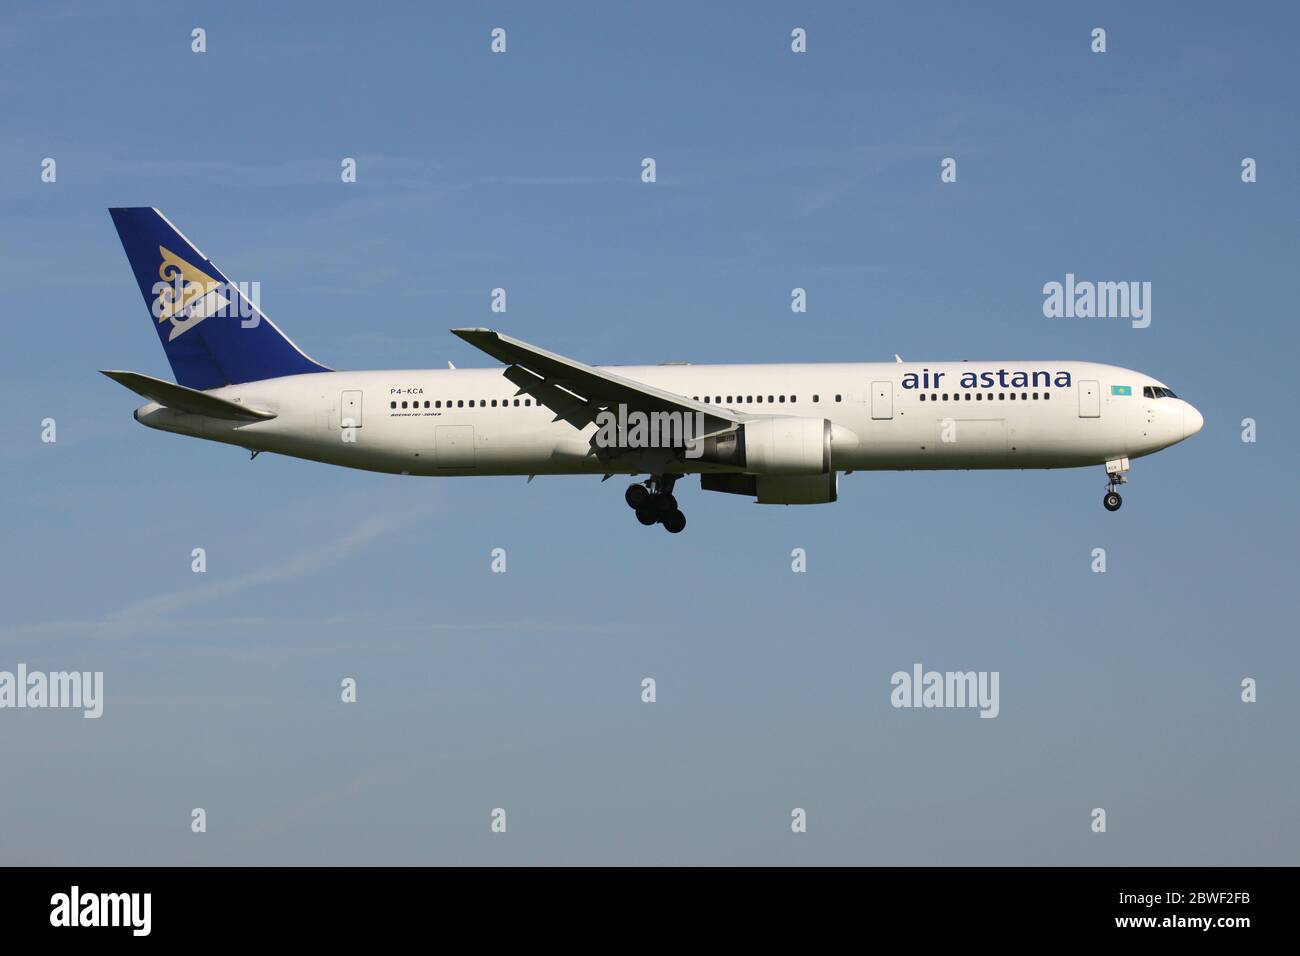 Kazakh Air Astana Boeing 767-300 with registration P4-KCA on short final for Amsterdam Airport Schiphol. Stock Photo